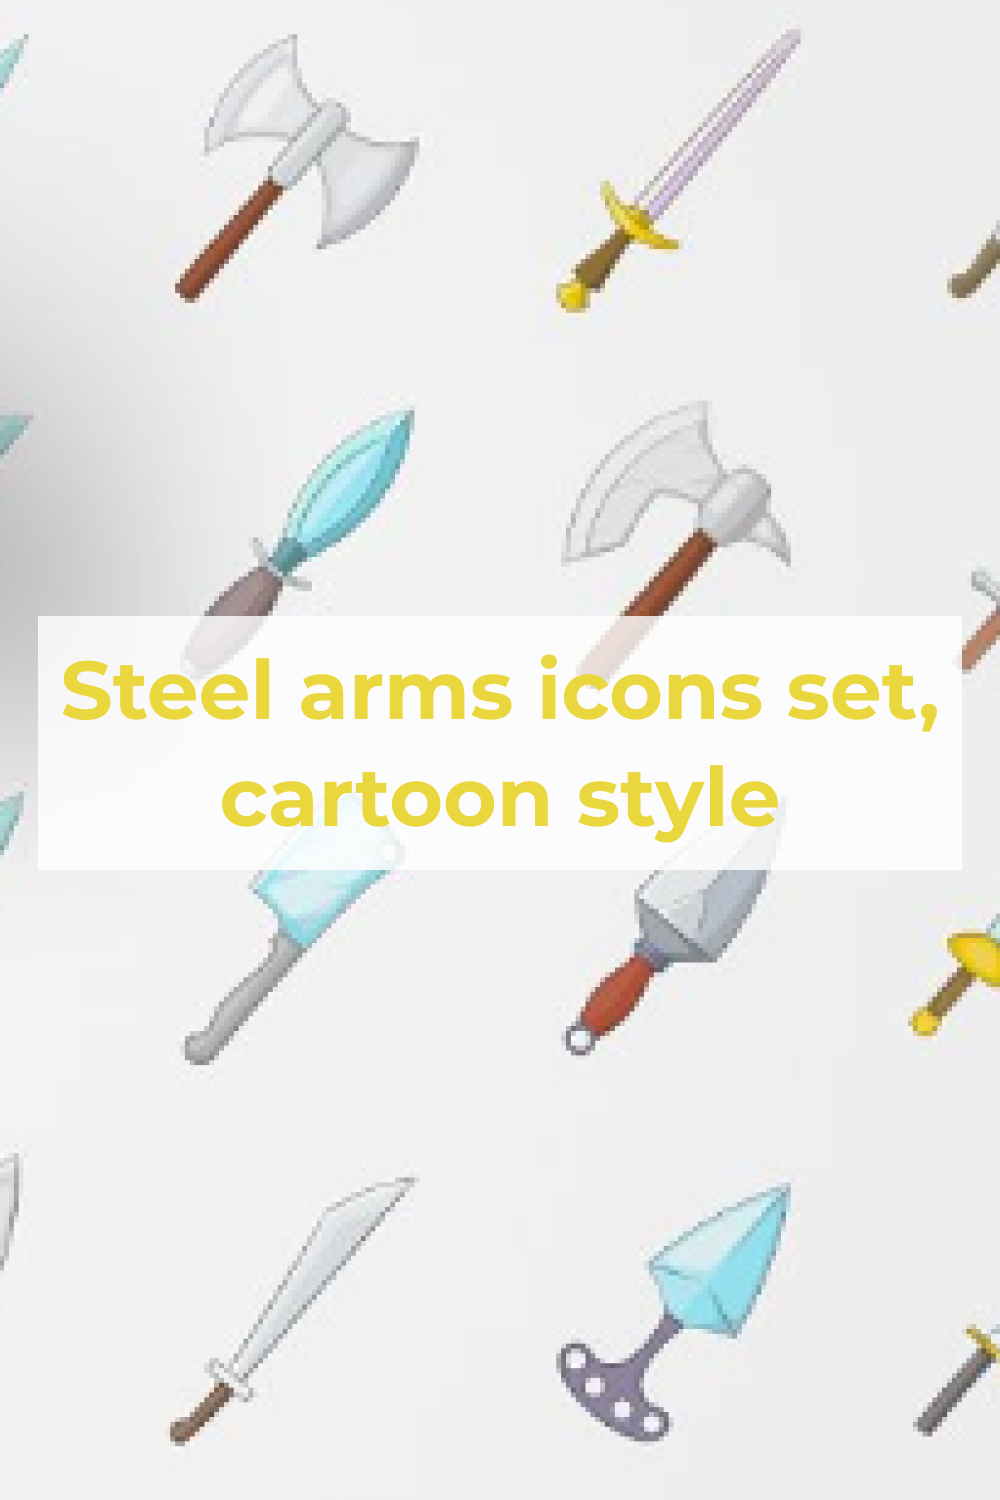 Steel Arms Icons Set, Cartoon Style.